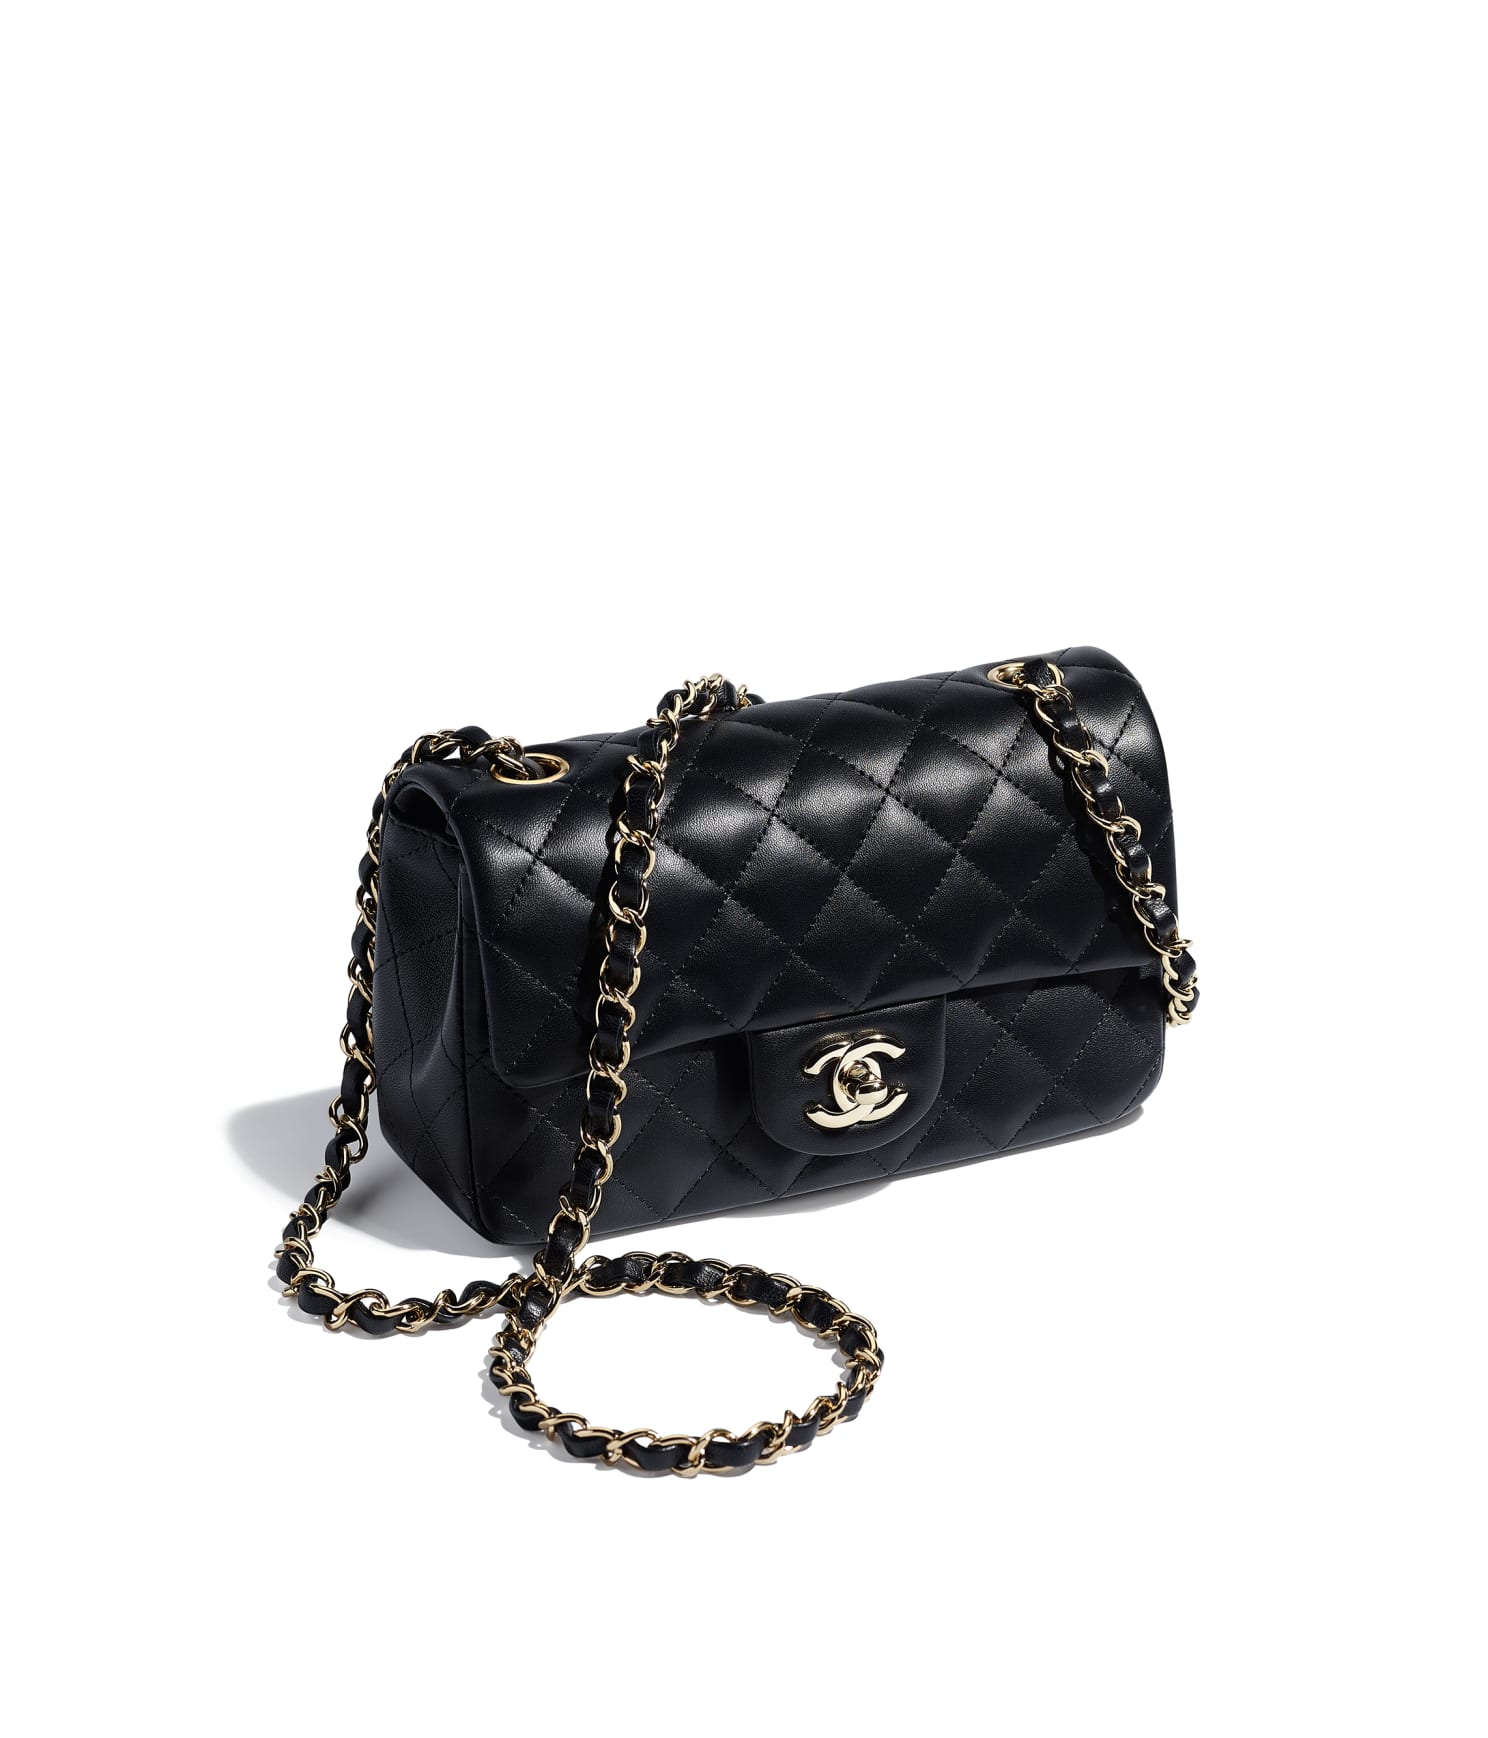 Chanel Classic Bag Price Increase Effective November 3rd - Spotted Fashion